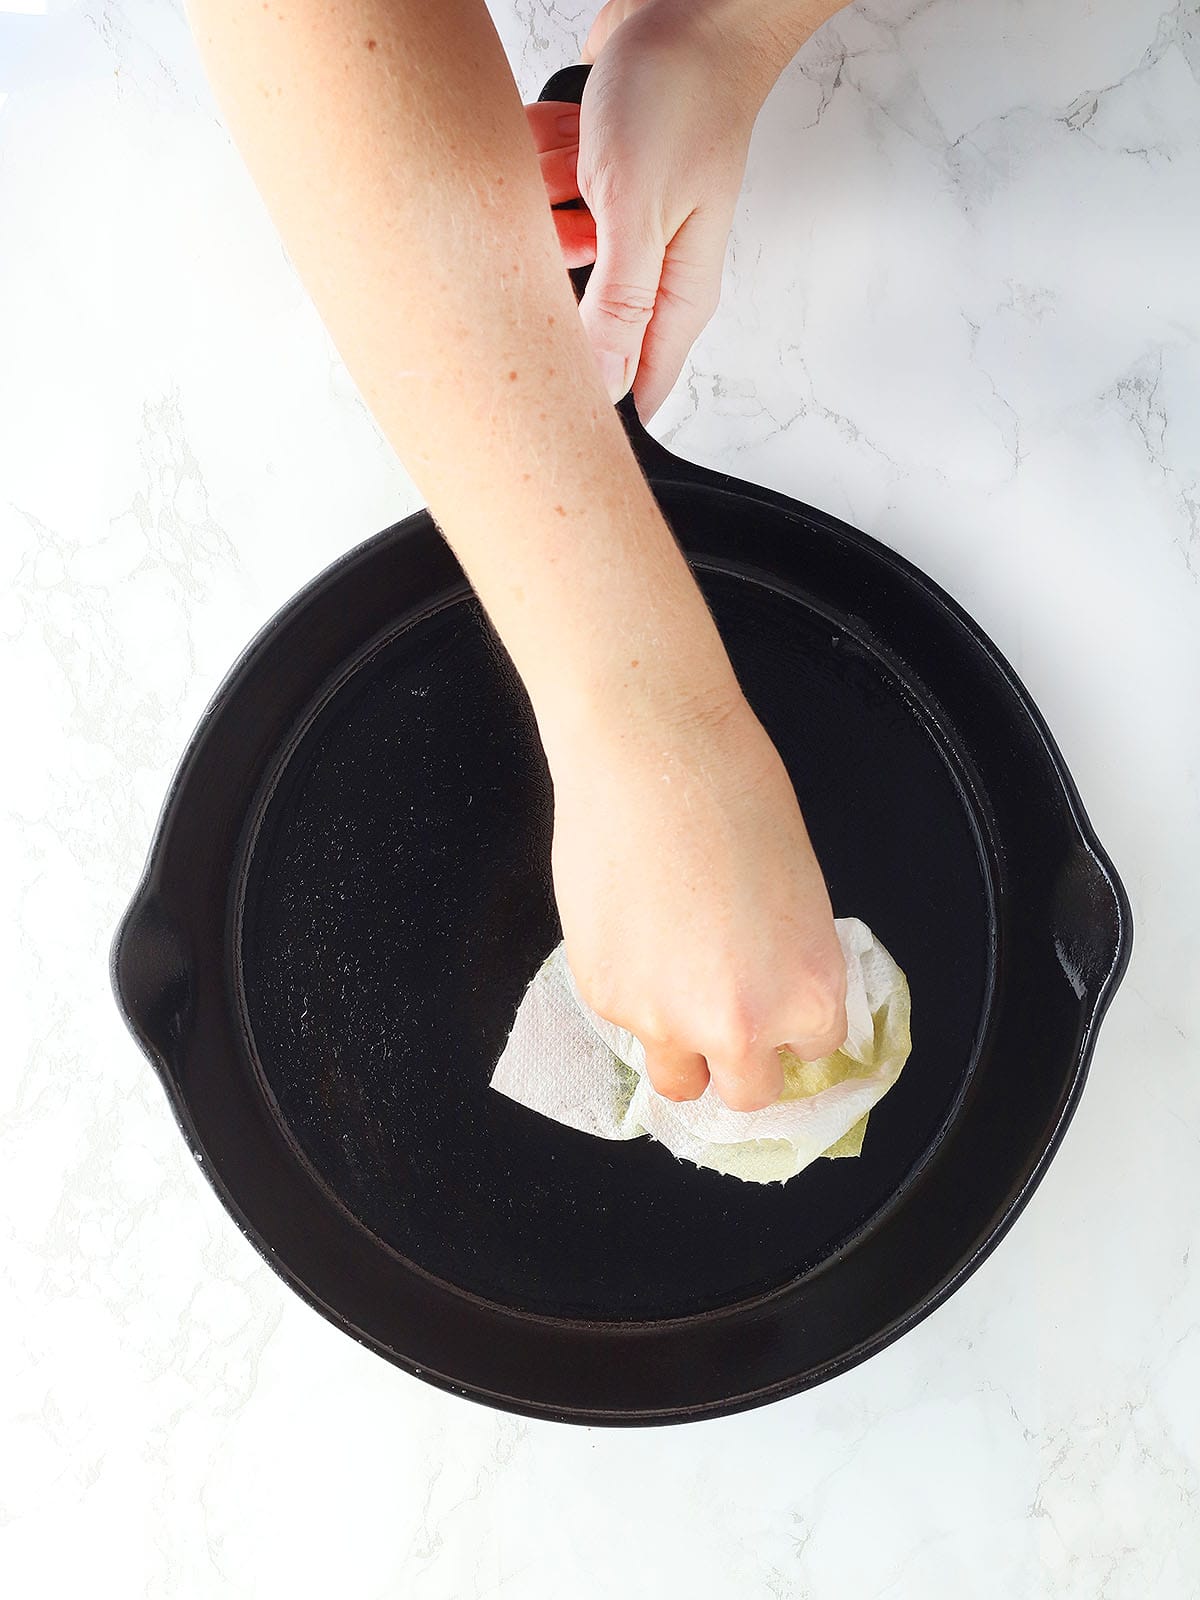 hand wiping excess oil out of a cast iron skillet